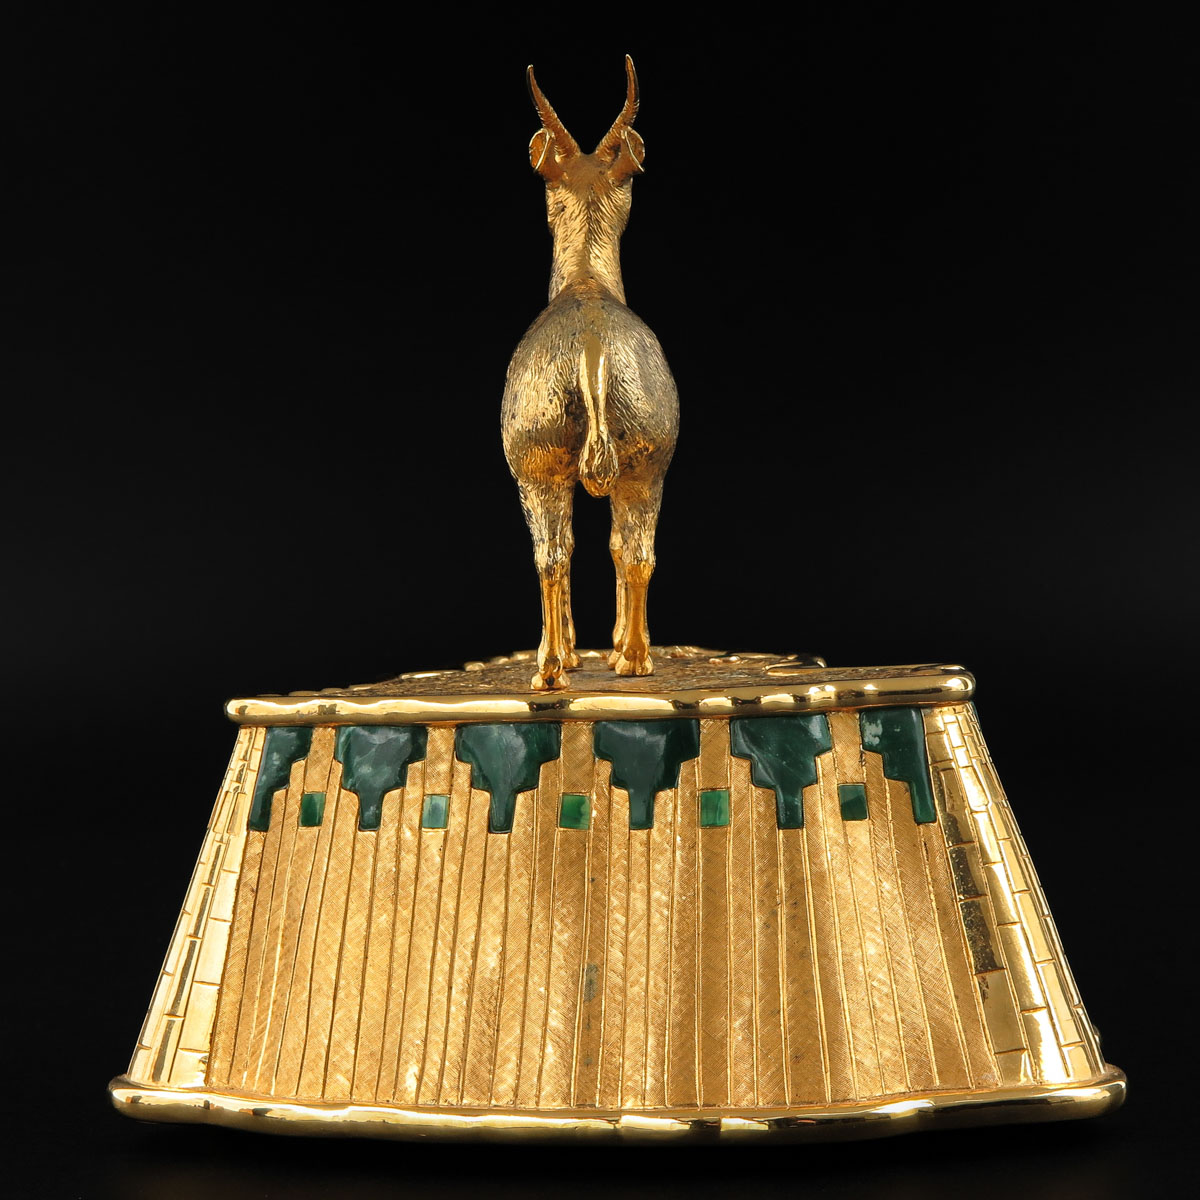 A Mouawad Jewelers Antelope Sculpture Set with Jewels - Image 2 of 10